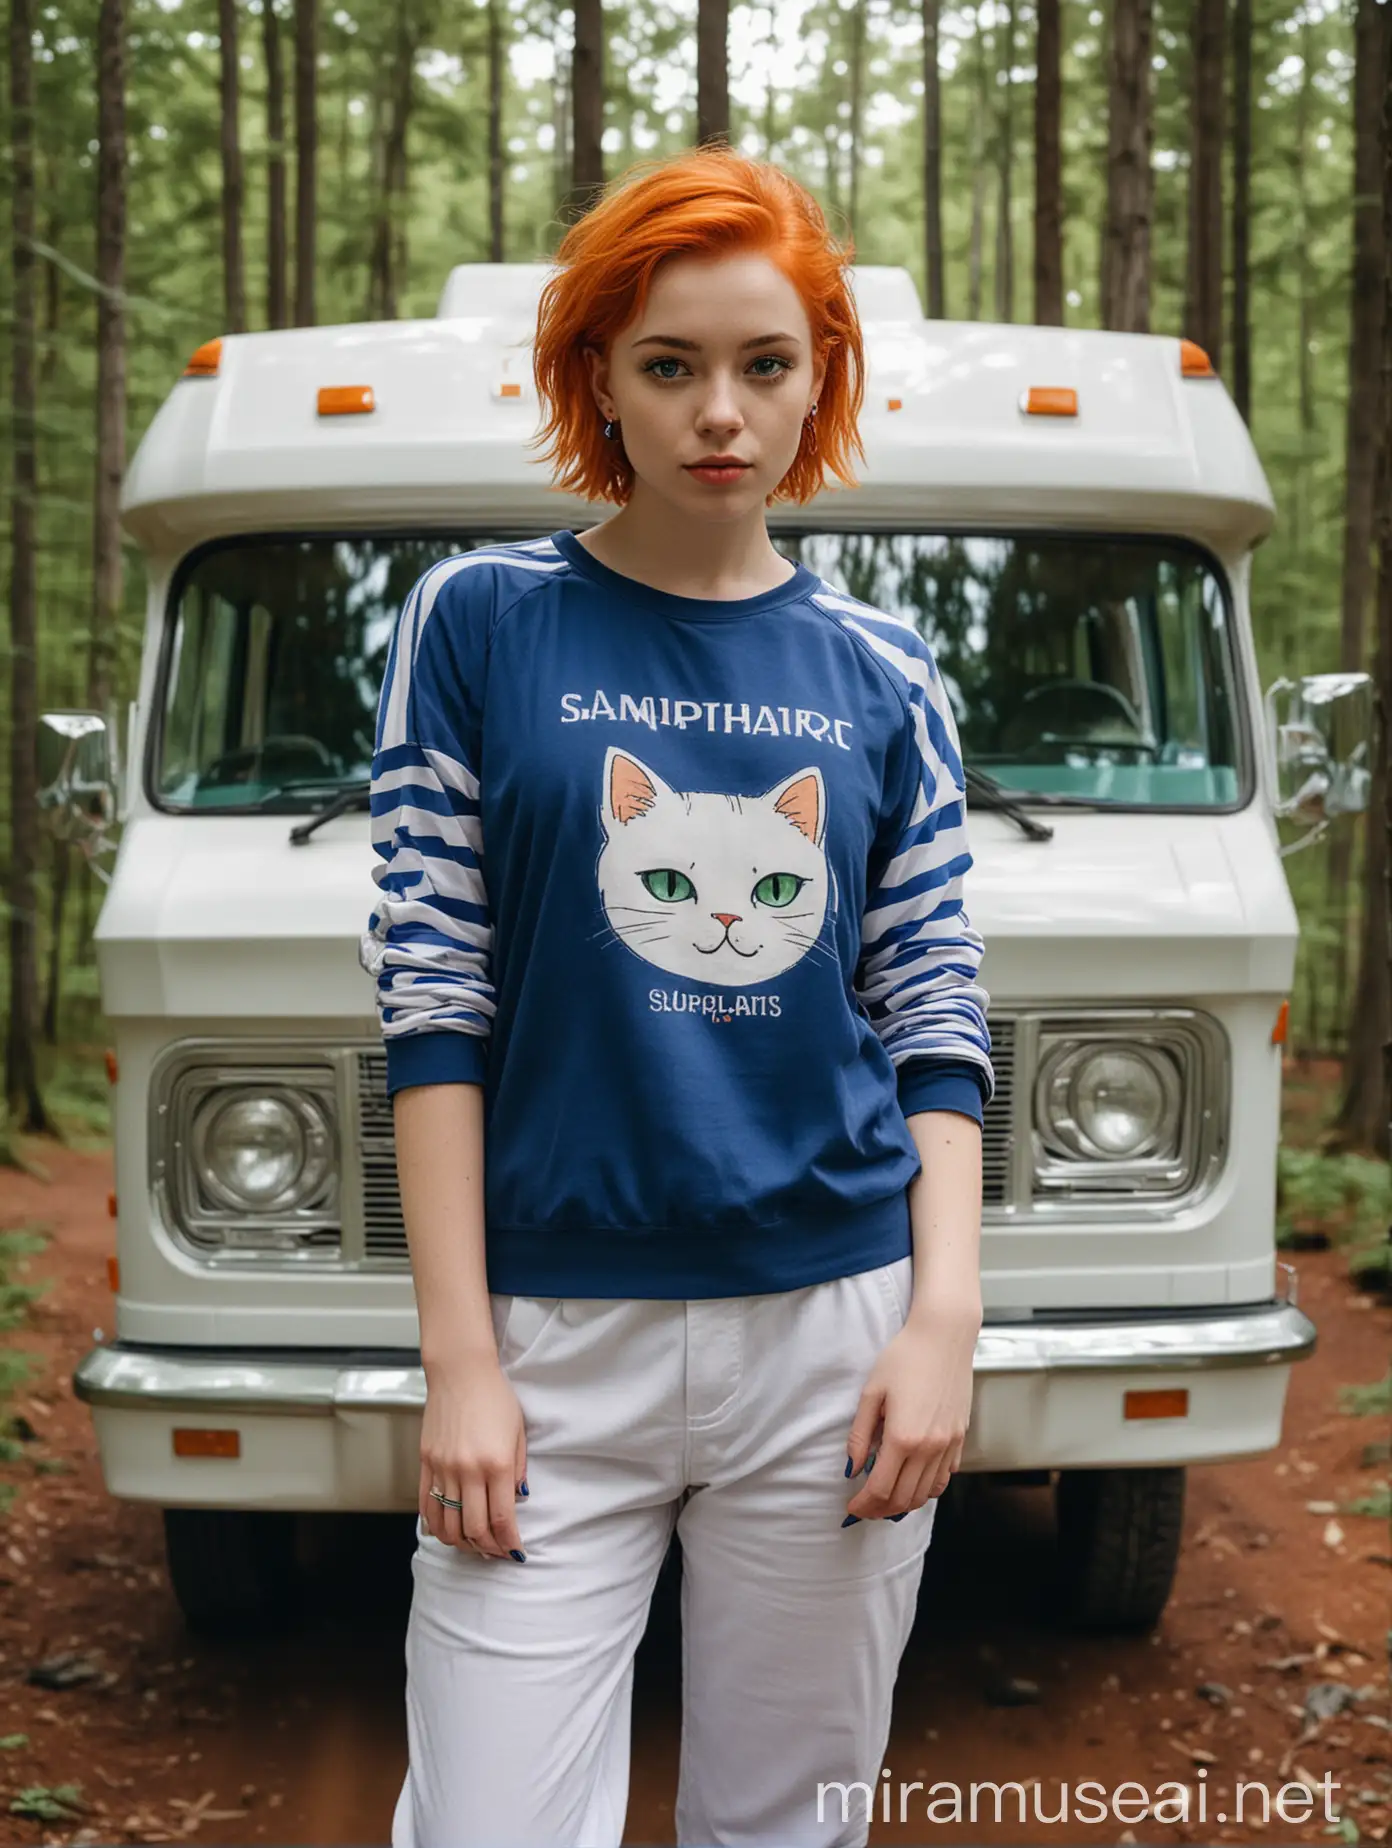 Young Woman with Orange Hair and Cat Logo Shirt Standing by GMC Motorhome in Forest